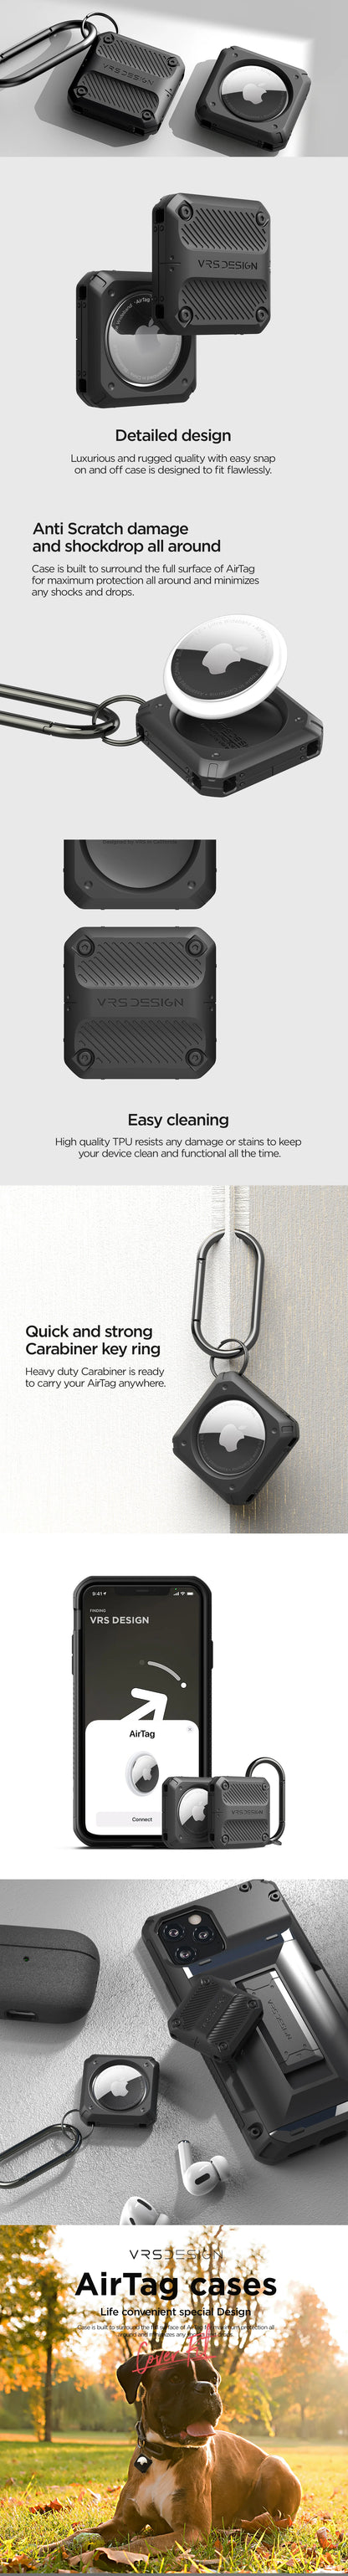 Smart AirTag gadget essential that alleviates life-style convenience cover to match your Apple AirTag